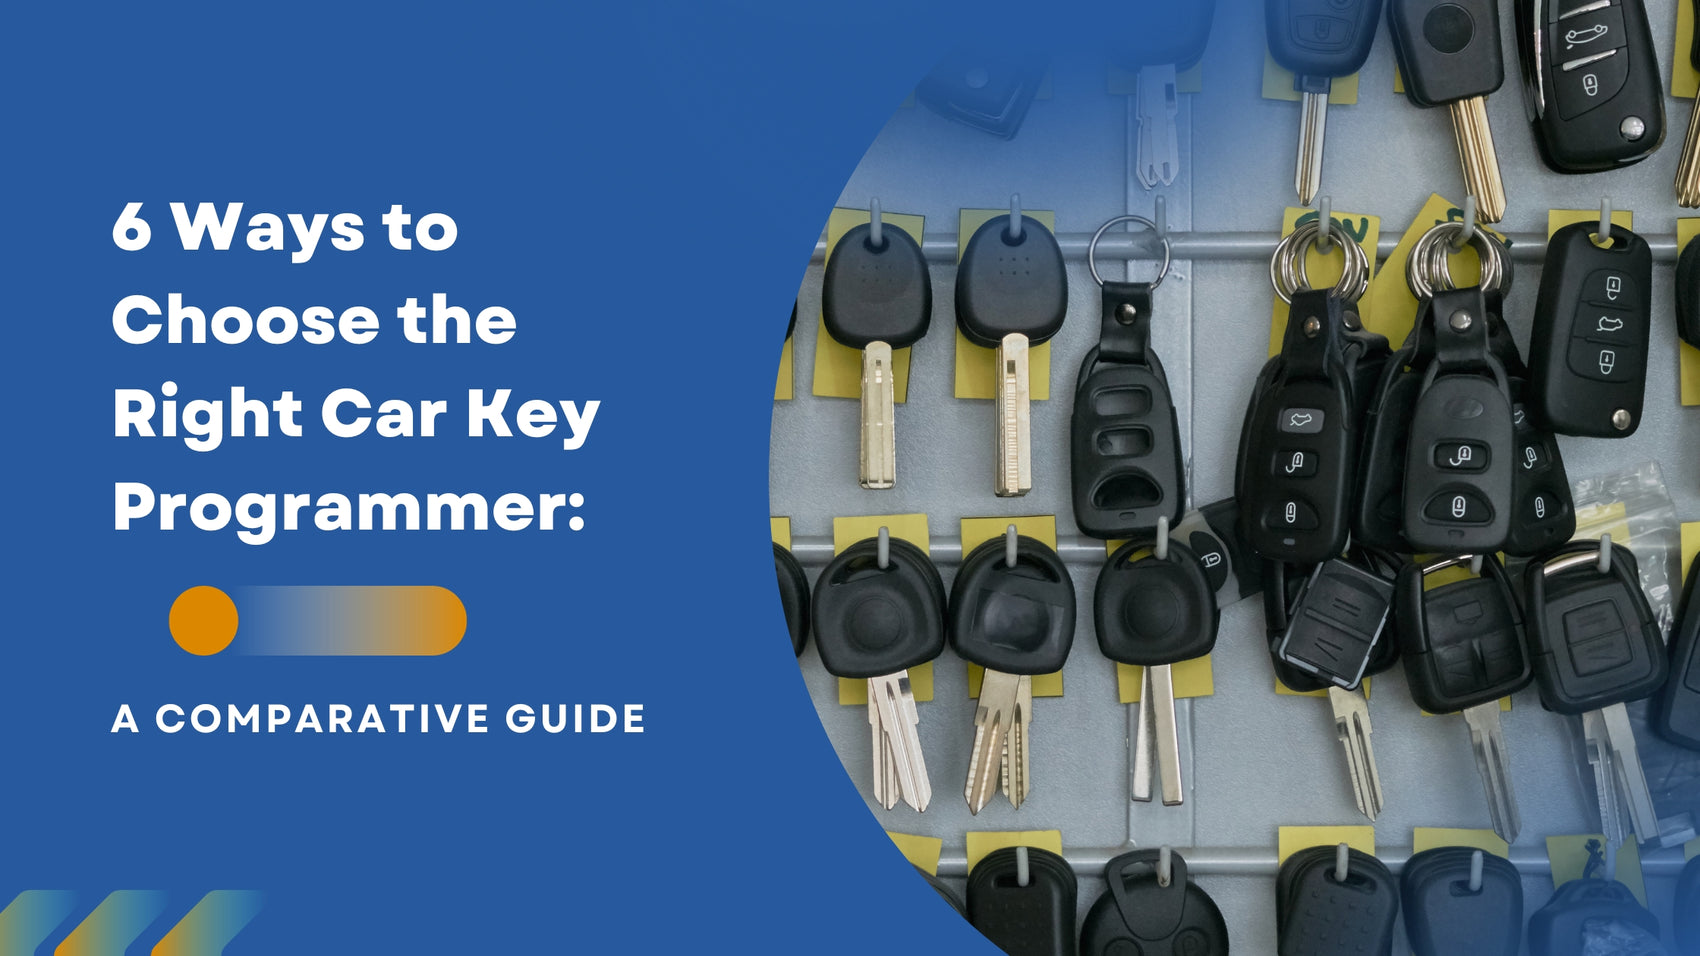 6 Ways to Choose the Right Car Key Programmer: A Comparative Guide